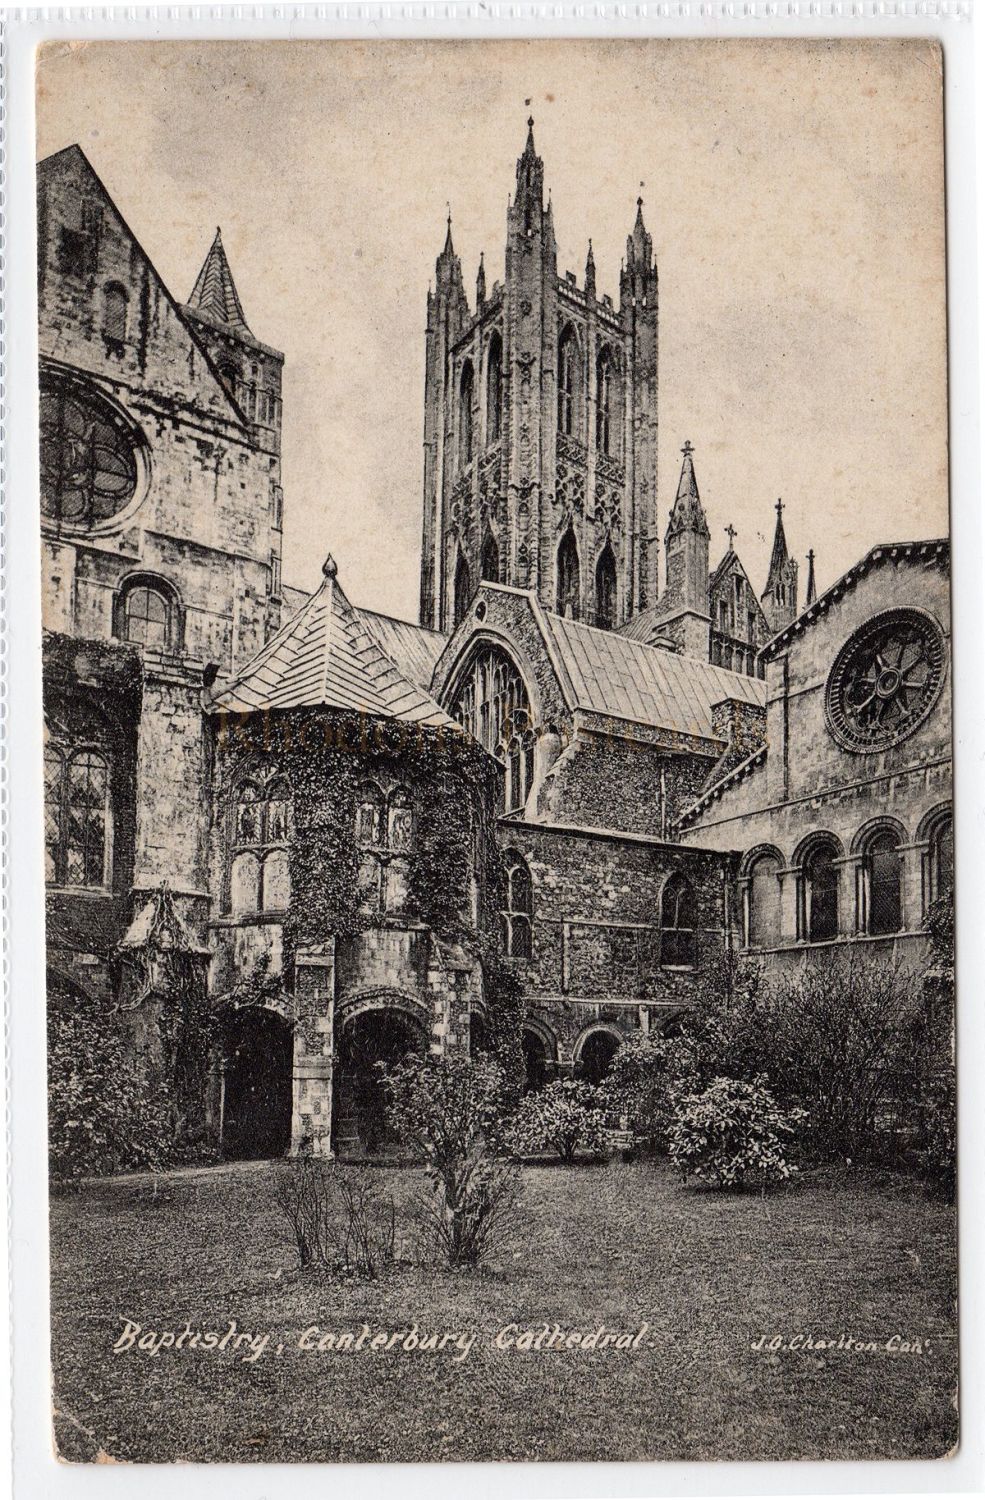 Baptistry, Canterbury Cathedral - Early 1900s Postcard